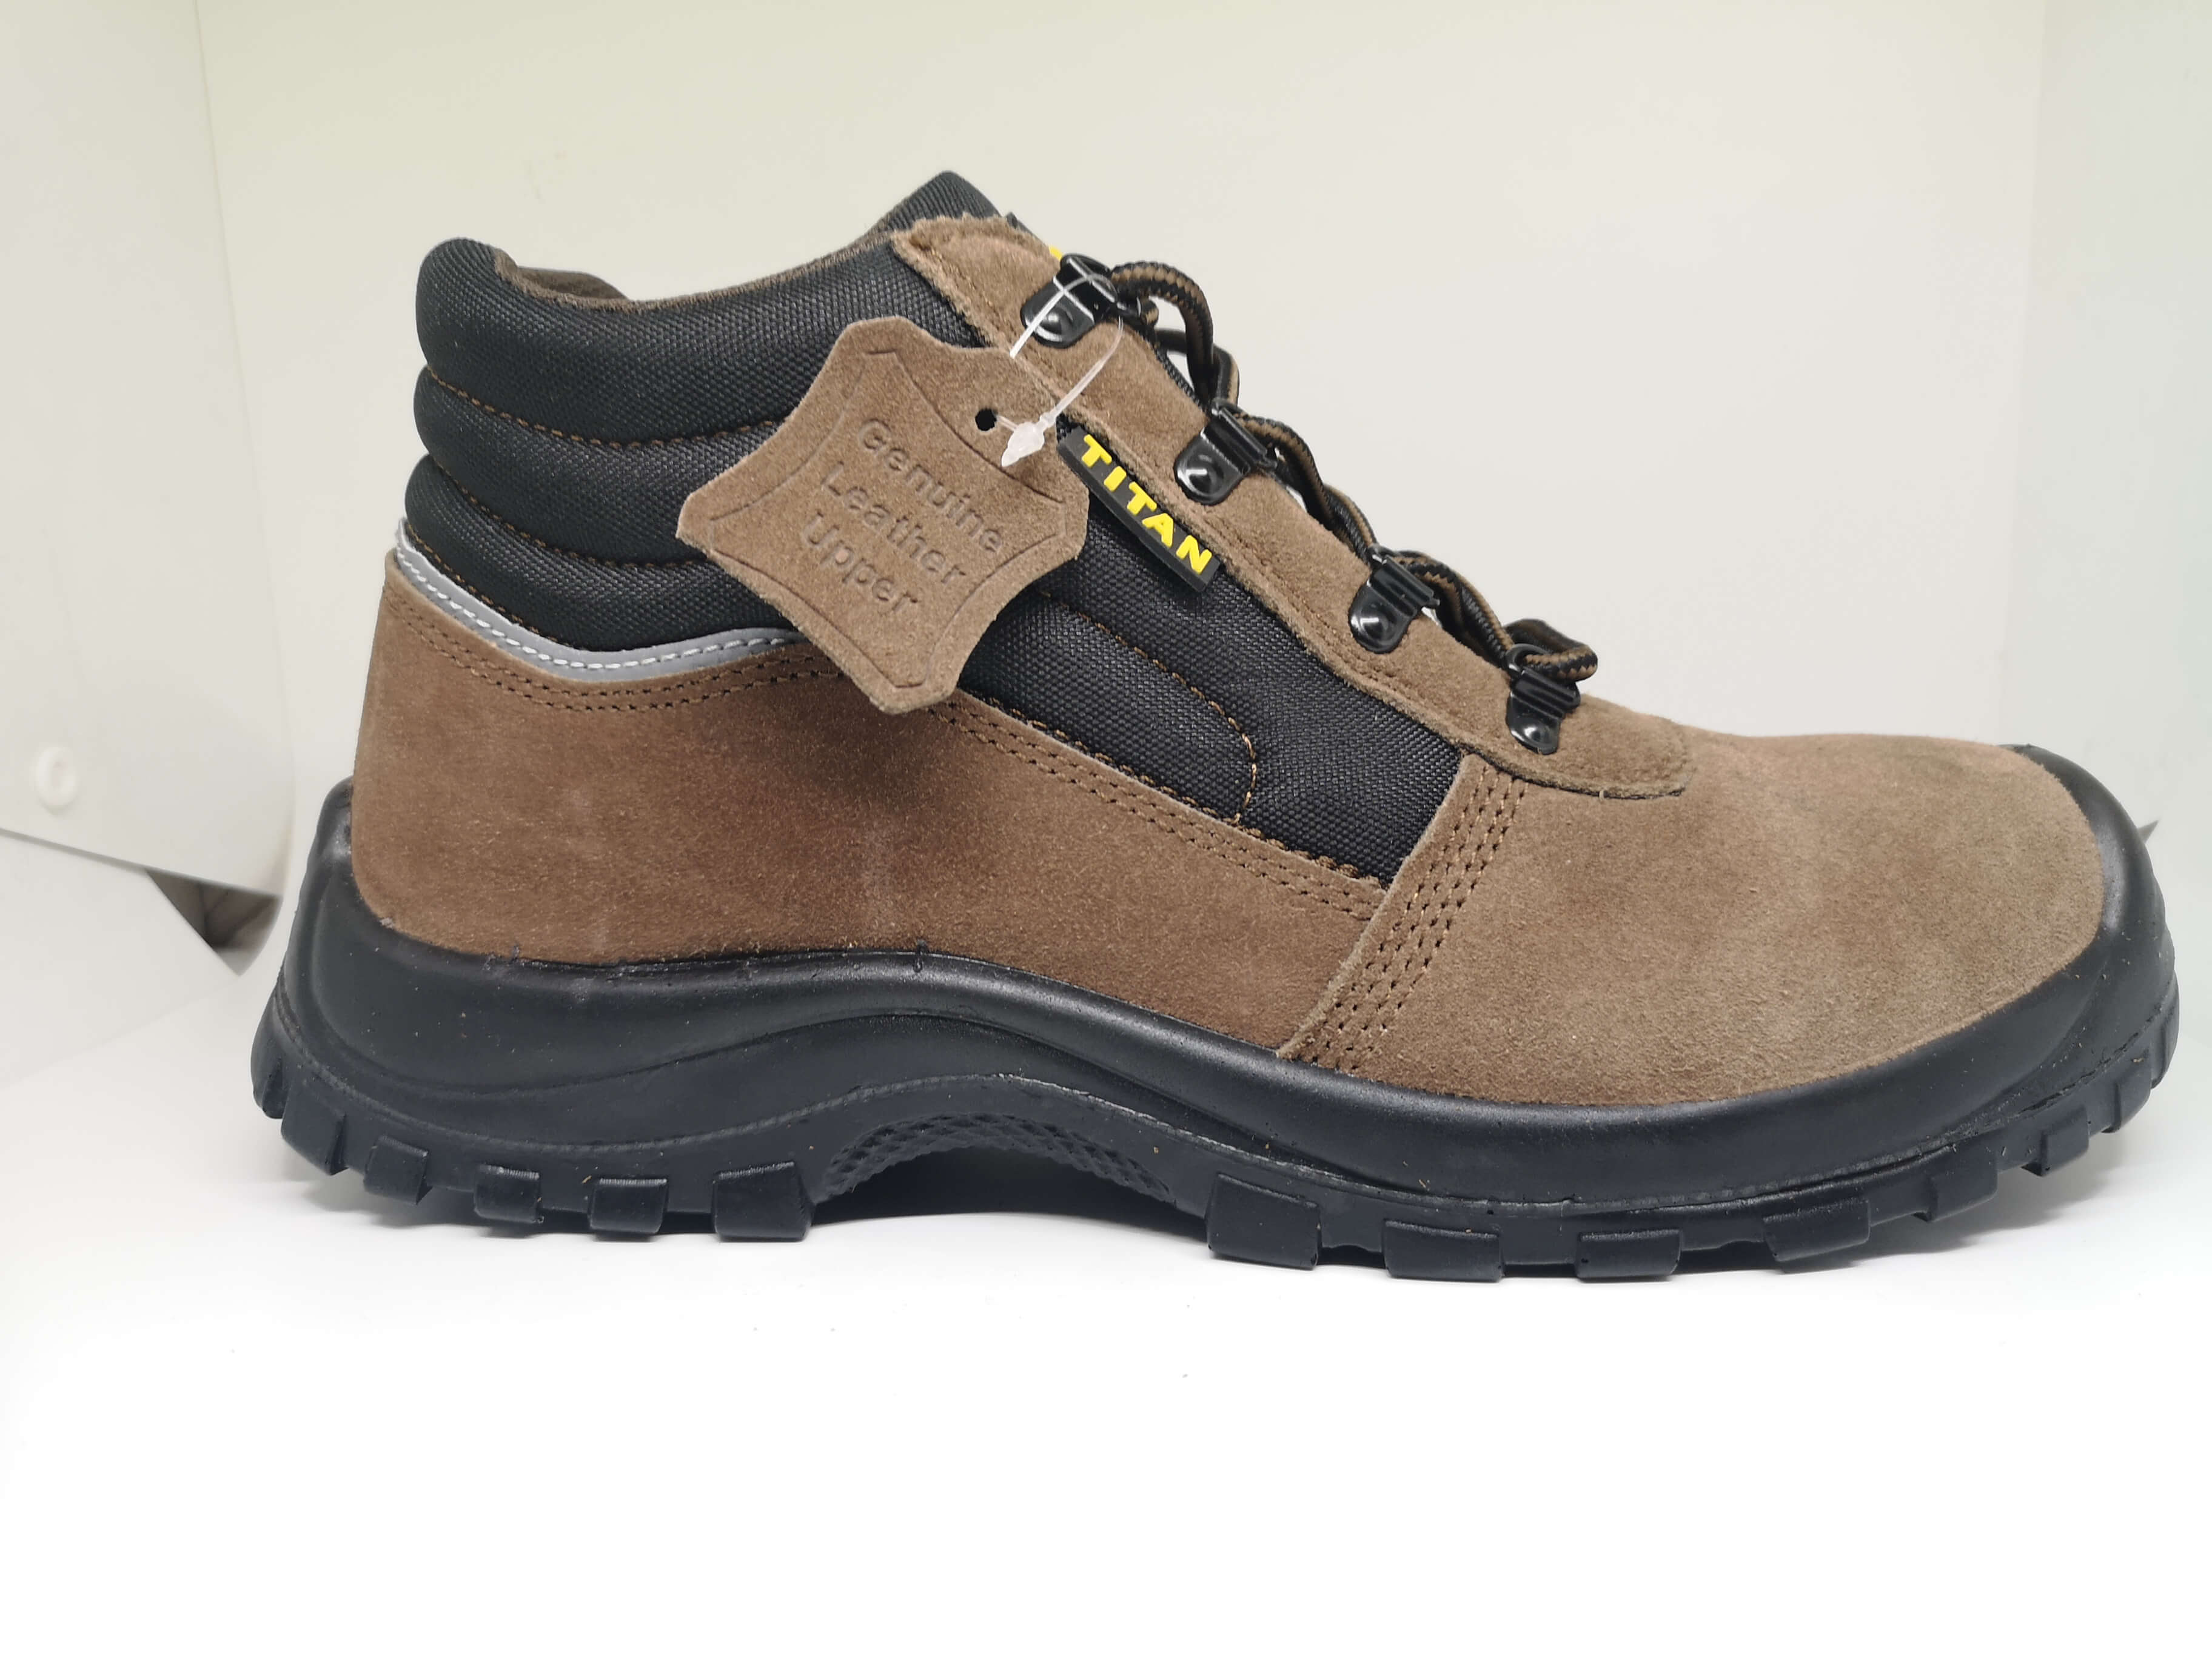 TITAN S1 P SRC TALL SAFETY SHOES SIZE 43